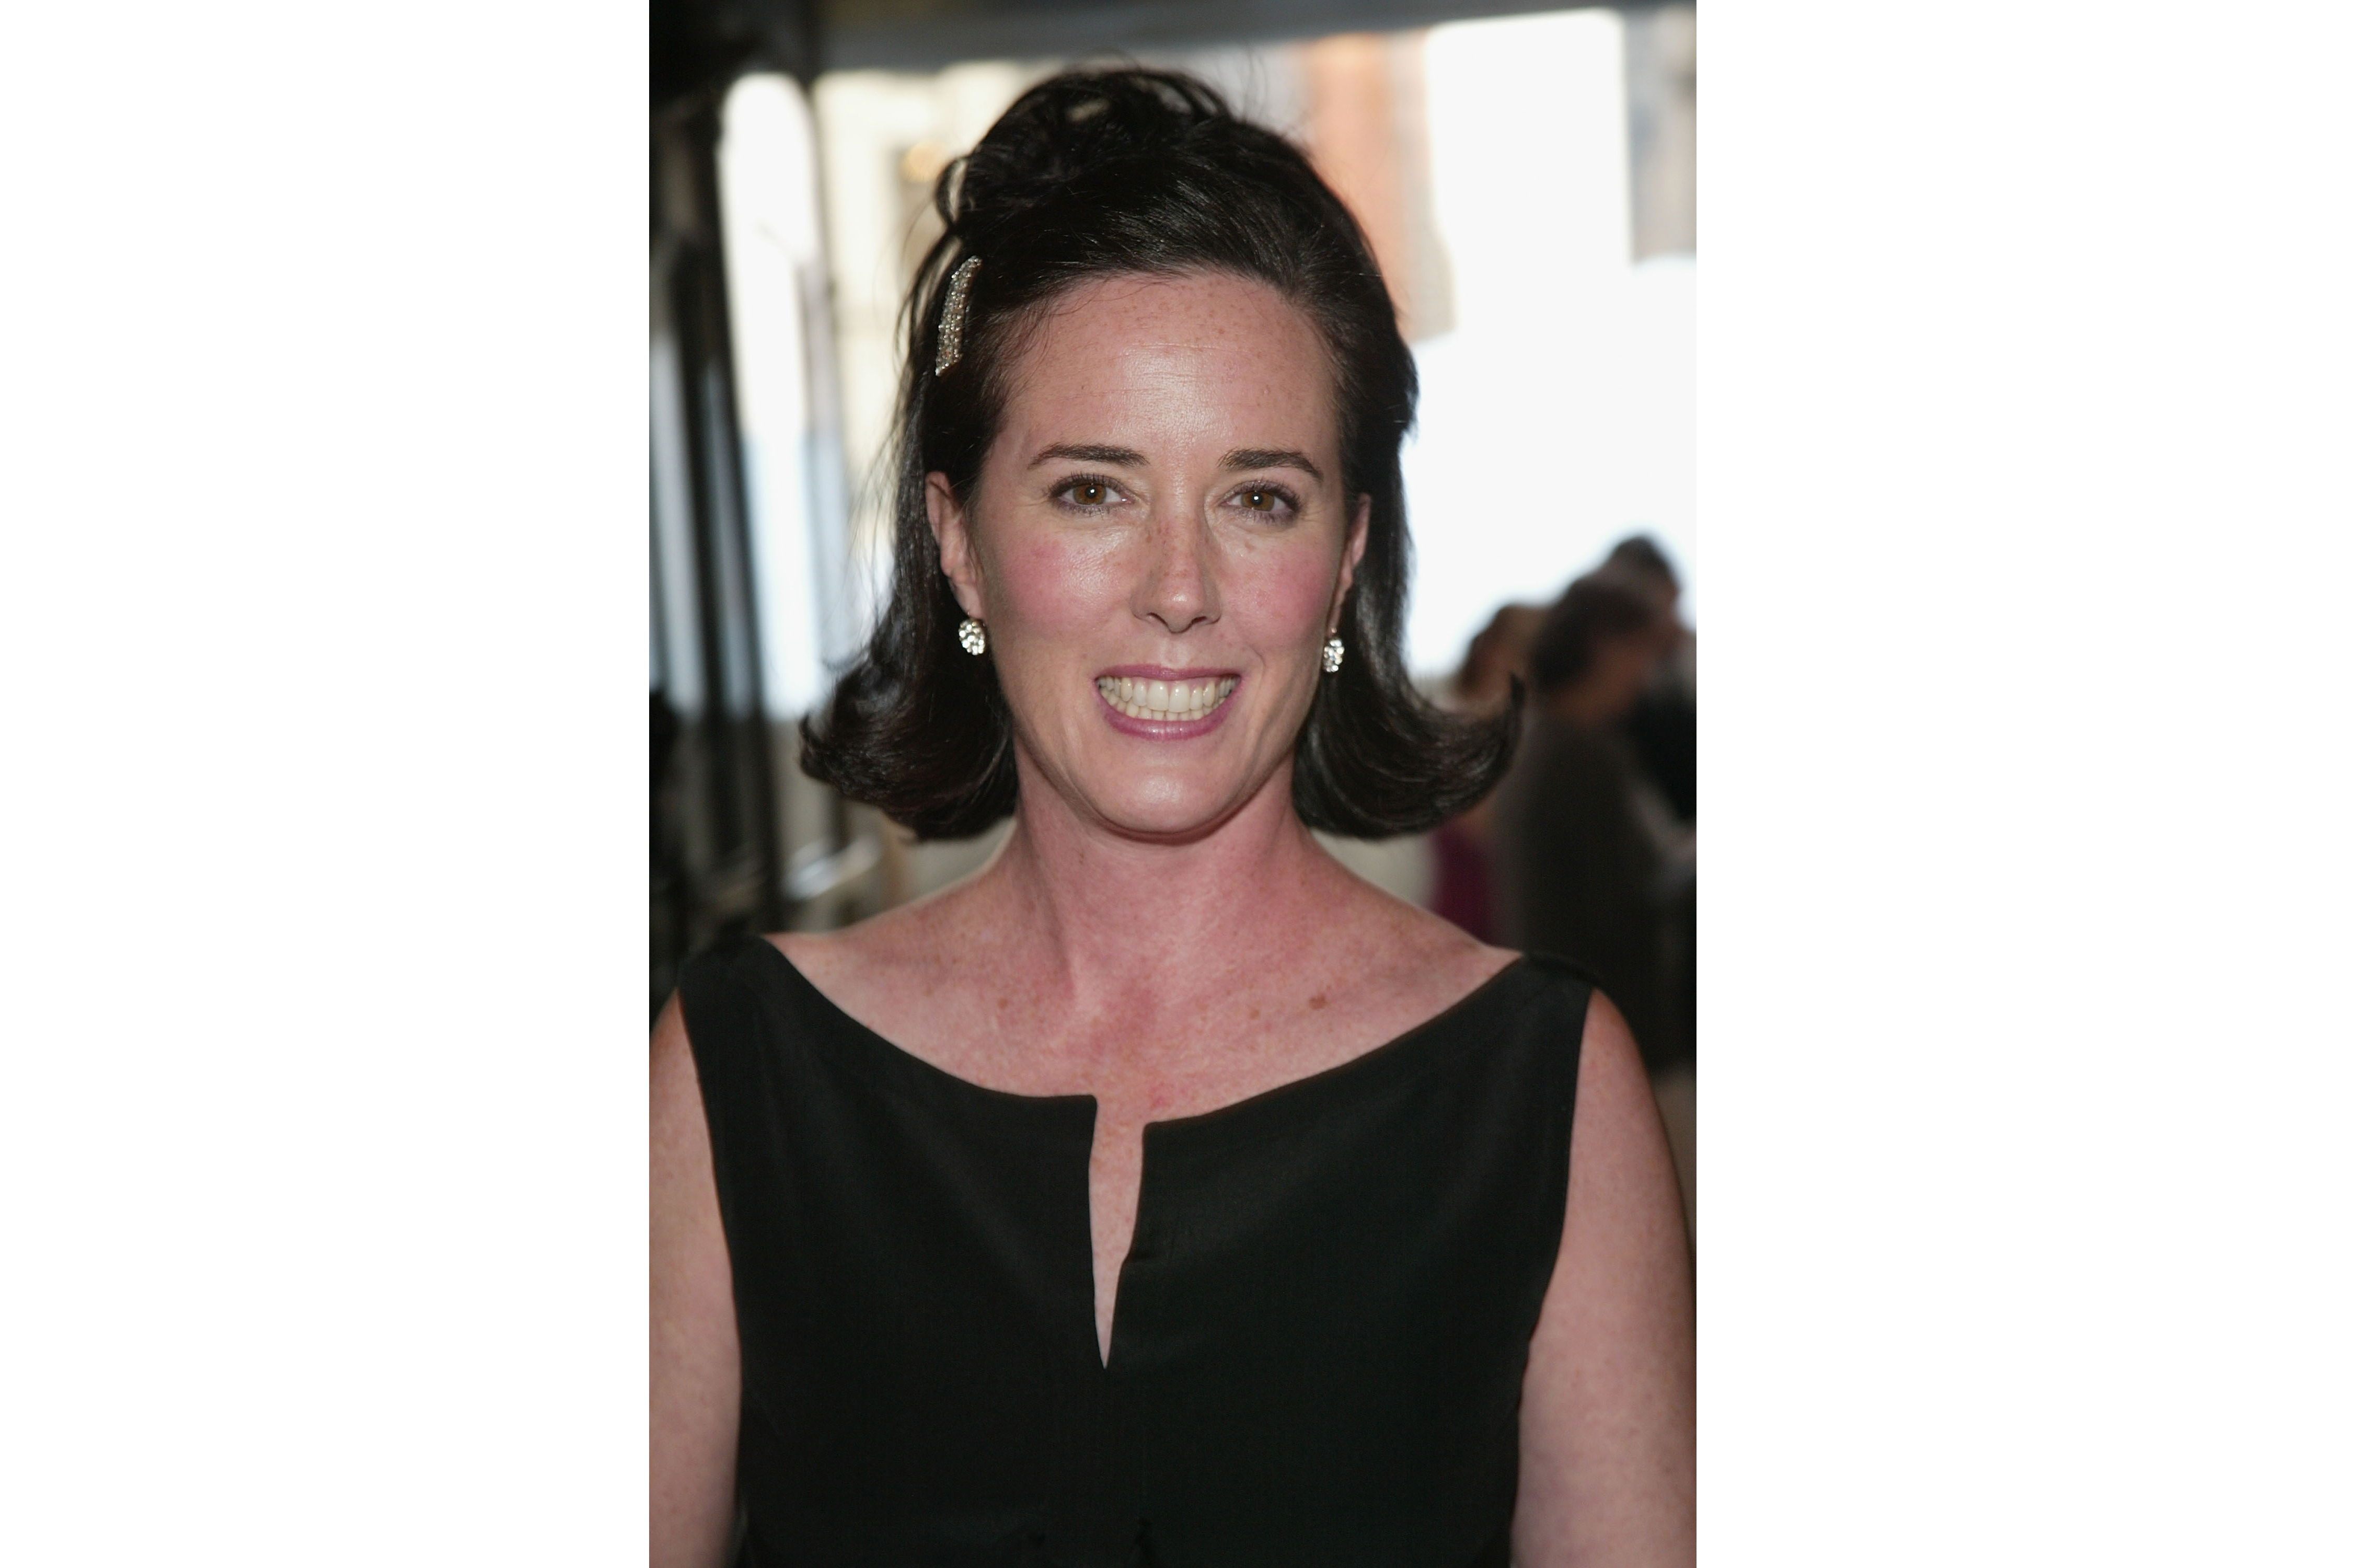 Siliconeer | Kate Spade suffered from mental illness for years: sister